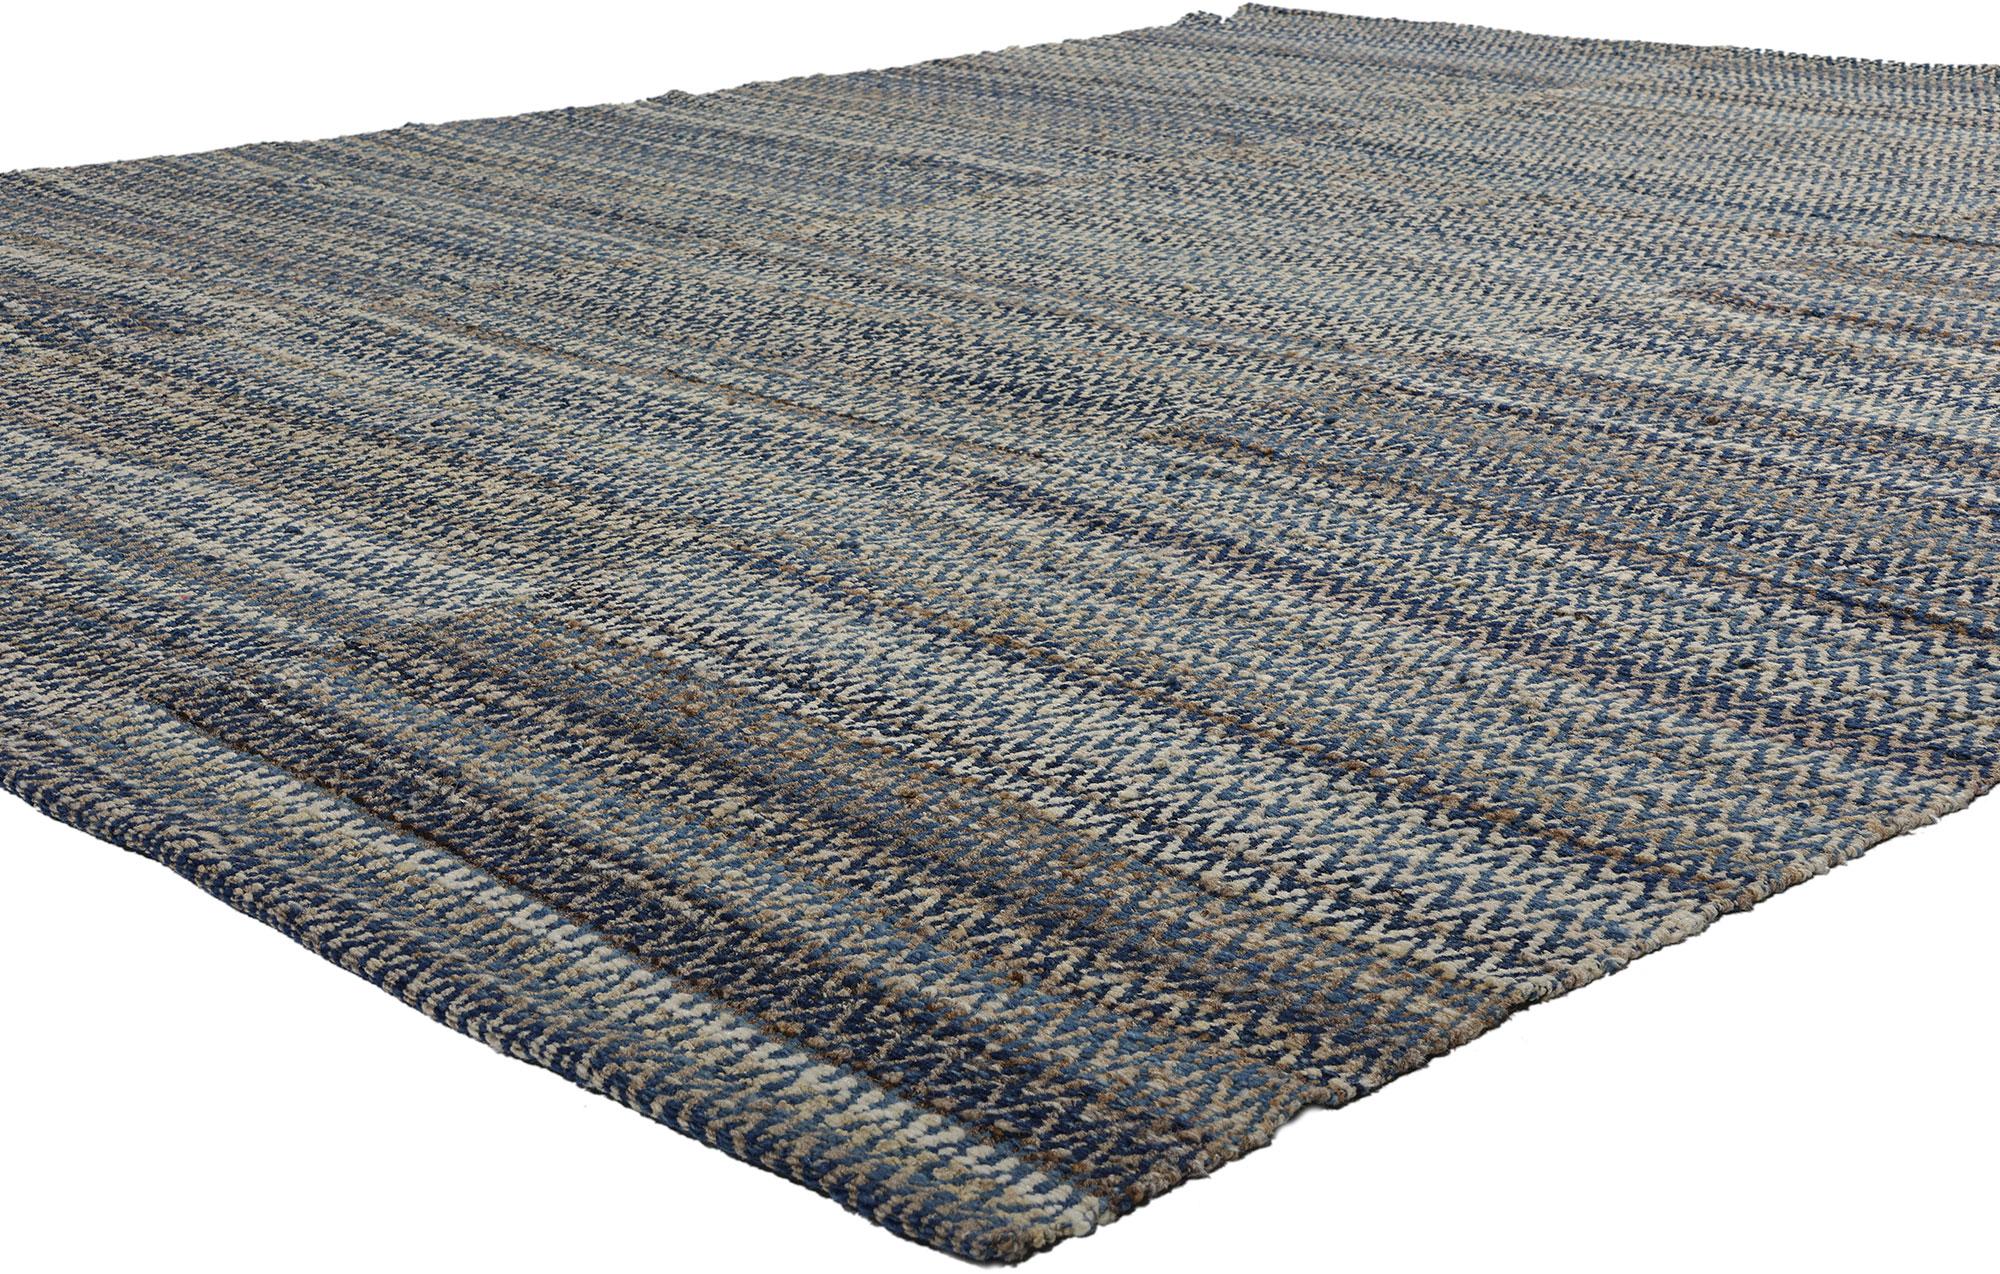 81103 Modern Blue Earth-Tone Chevron Kilim Rug, 07'10 x 09'10. Welcome to coastal chic living with our exquisite handwoven modern chevron kilim rug. Crafted with meticulous attention to detail, this flatweave rug features an intricate allover